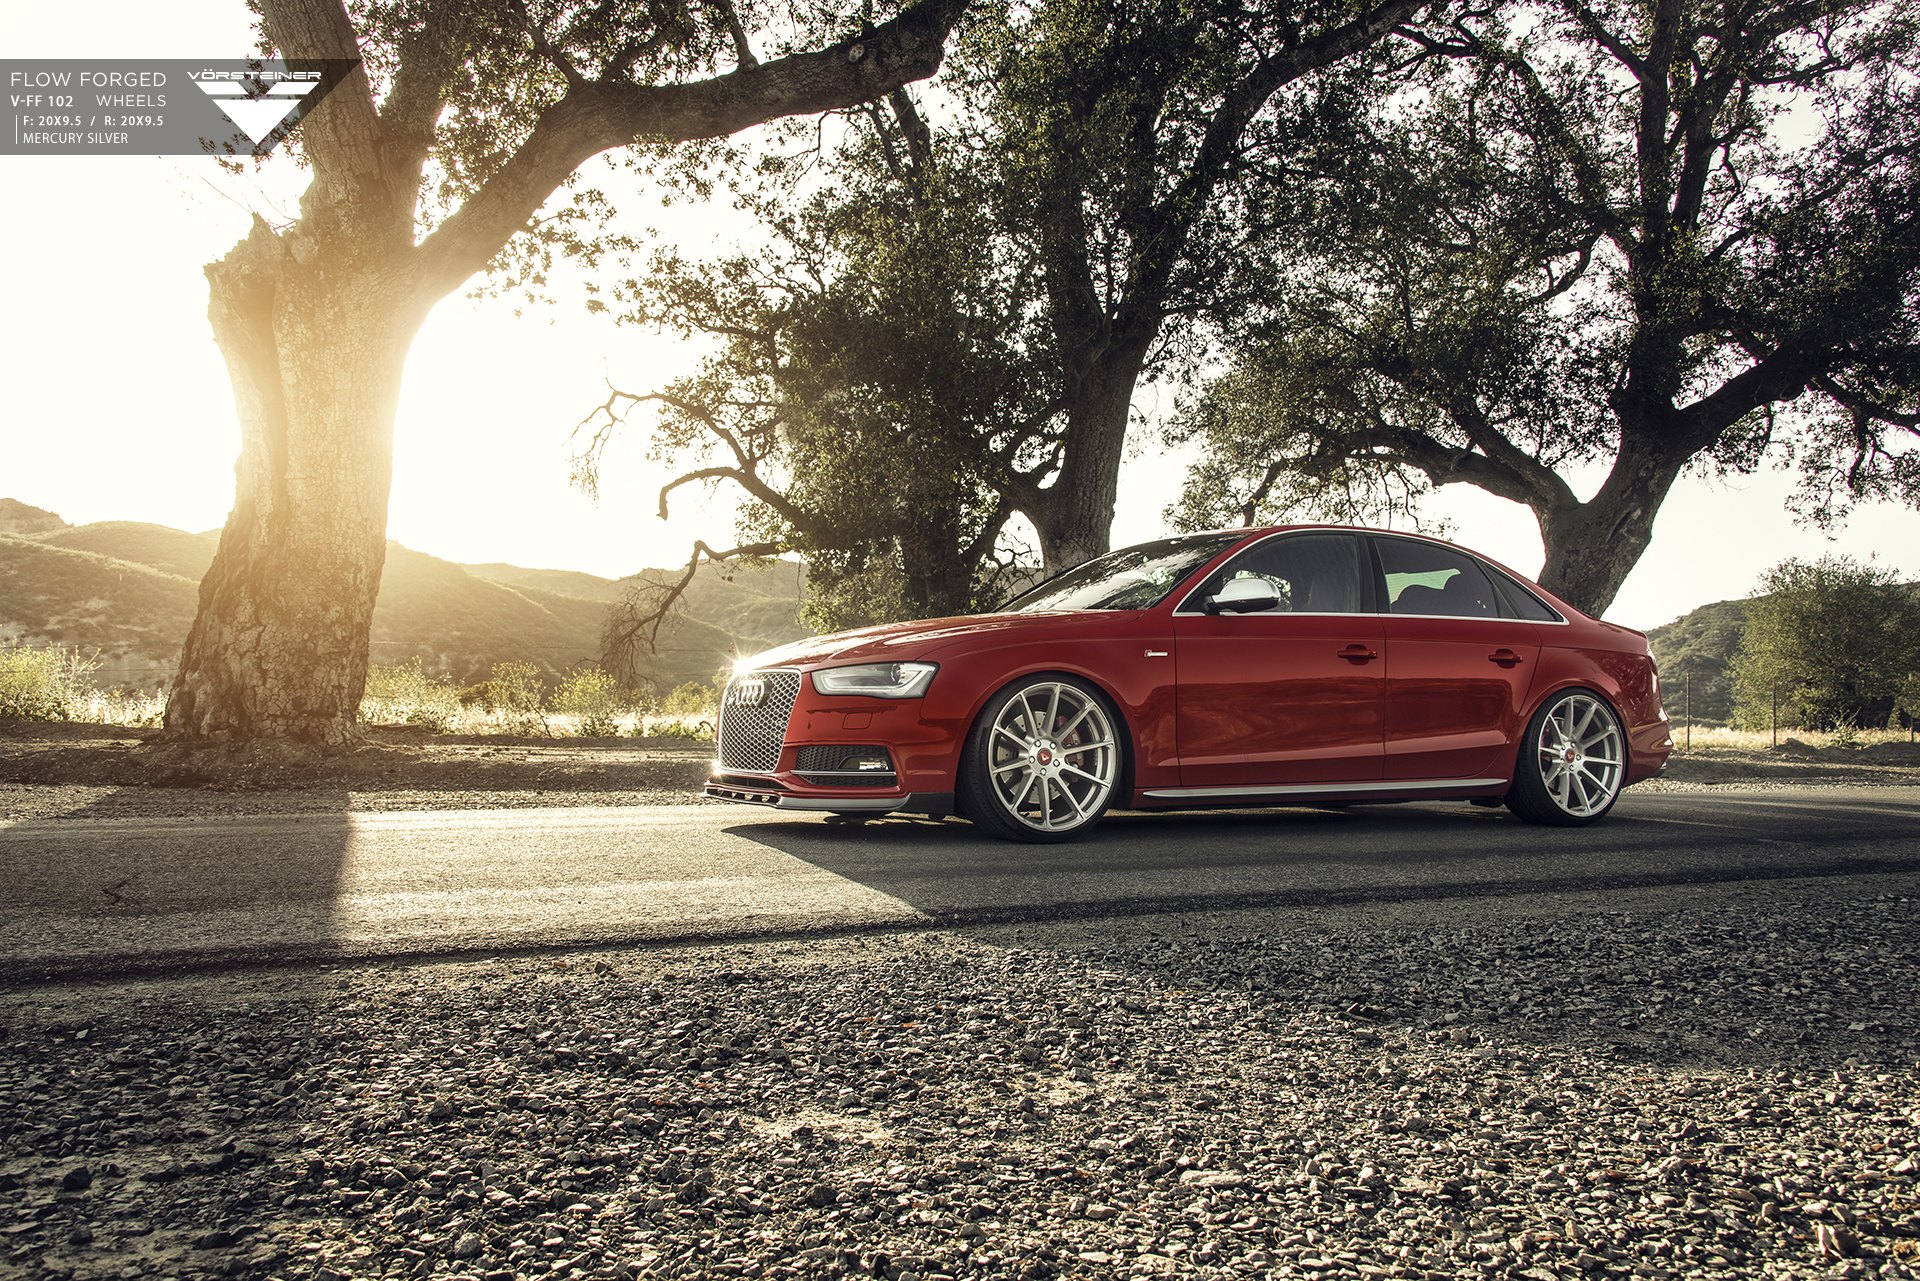 Red Audi S4 with Custom LED-Bar Style Headlights - Photo by Vorstiner